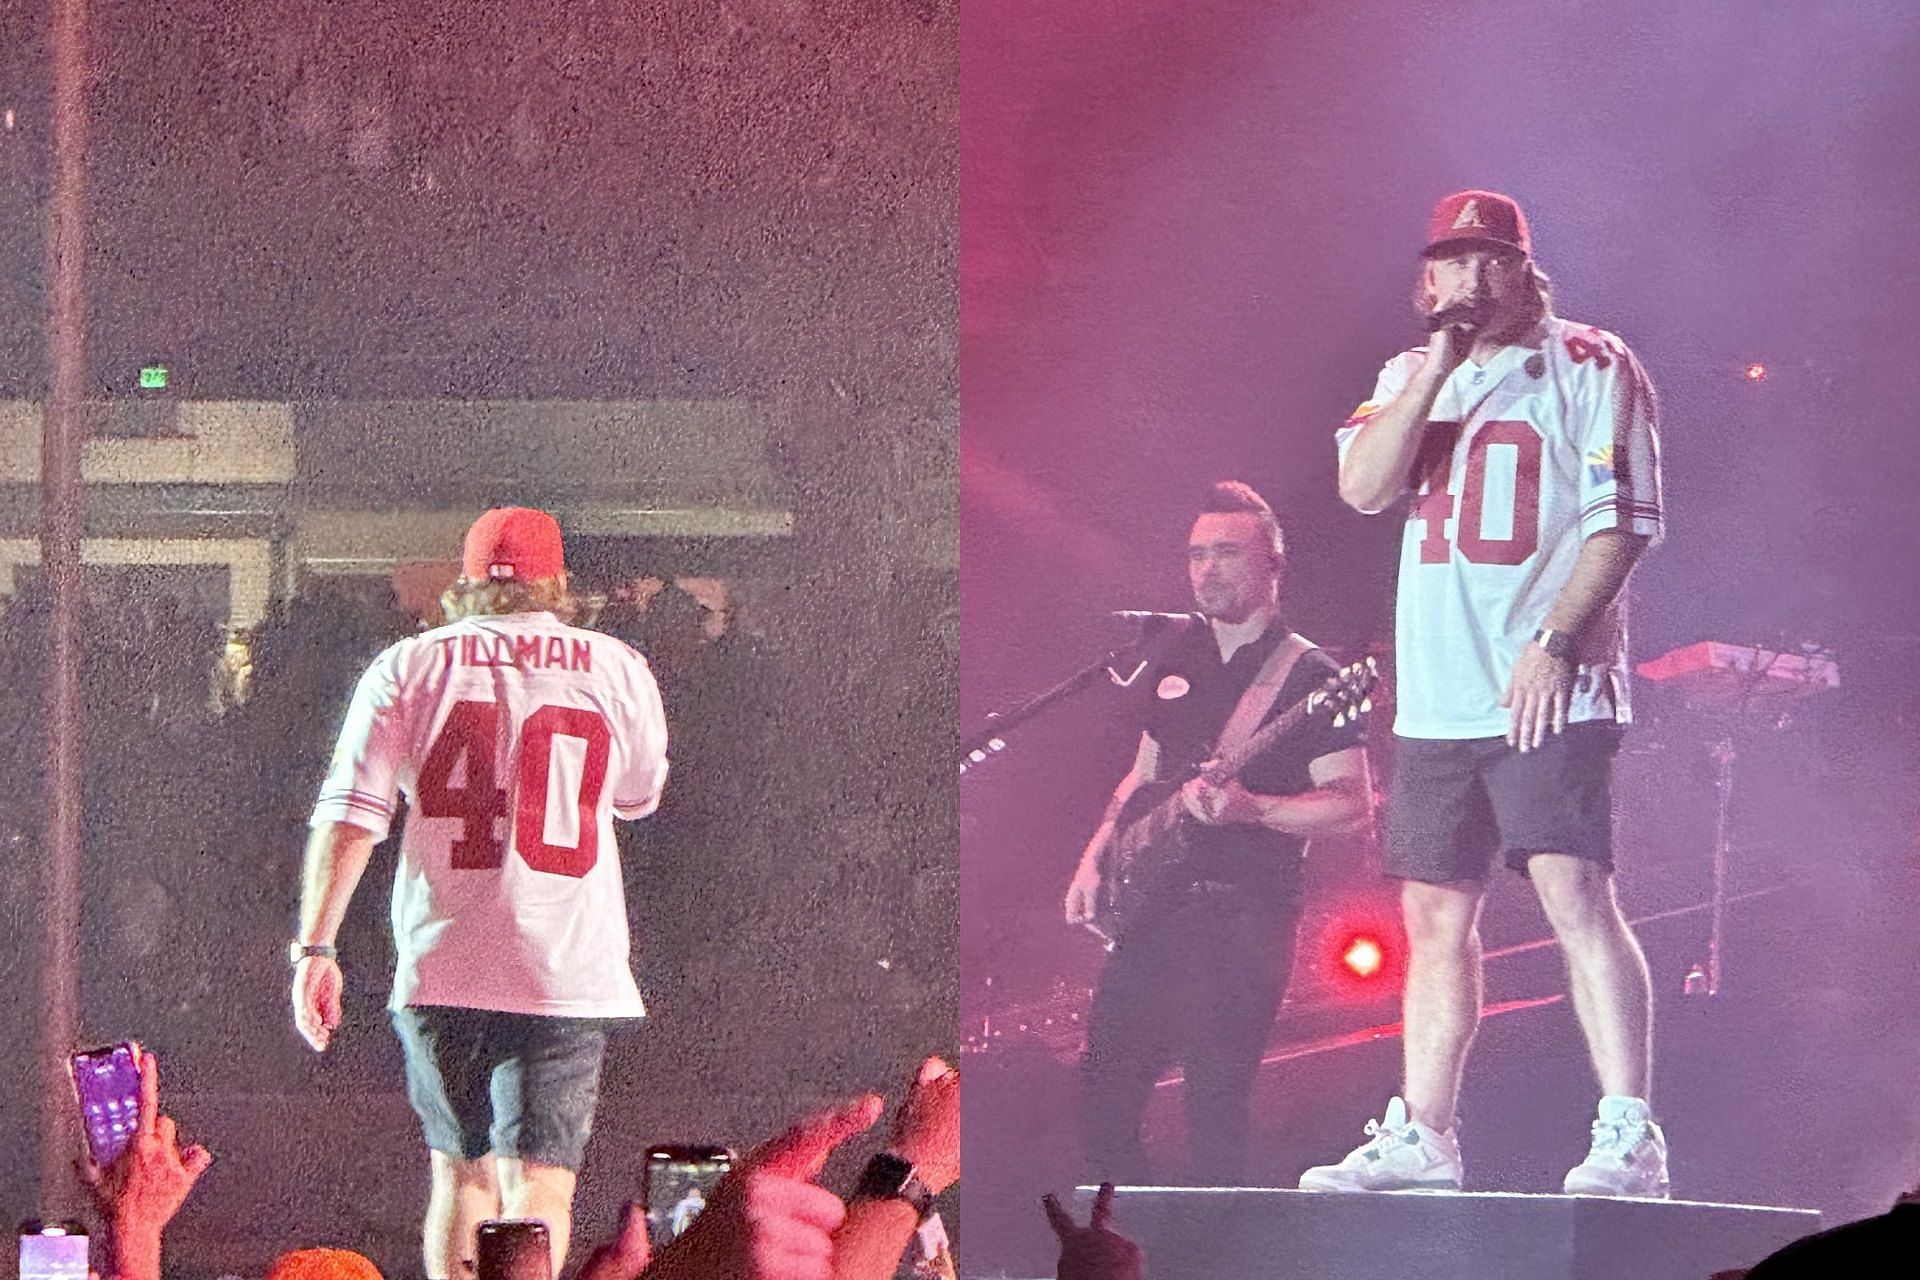 Morgan Wallen gets trashed by fans for using Pat Tillman for clout (Pic Courtesy: Twitter @Gambo987)